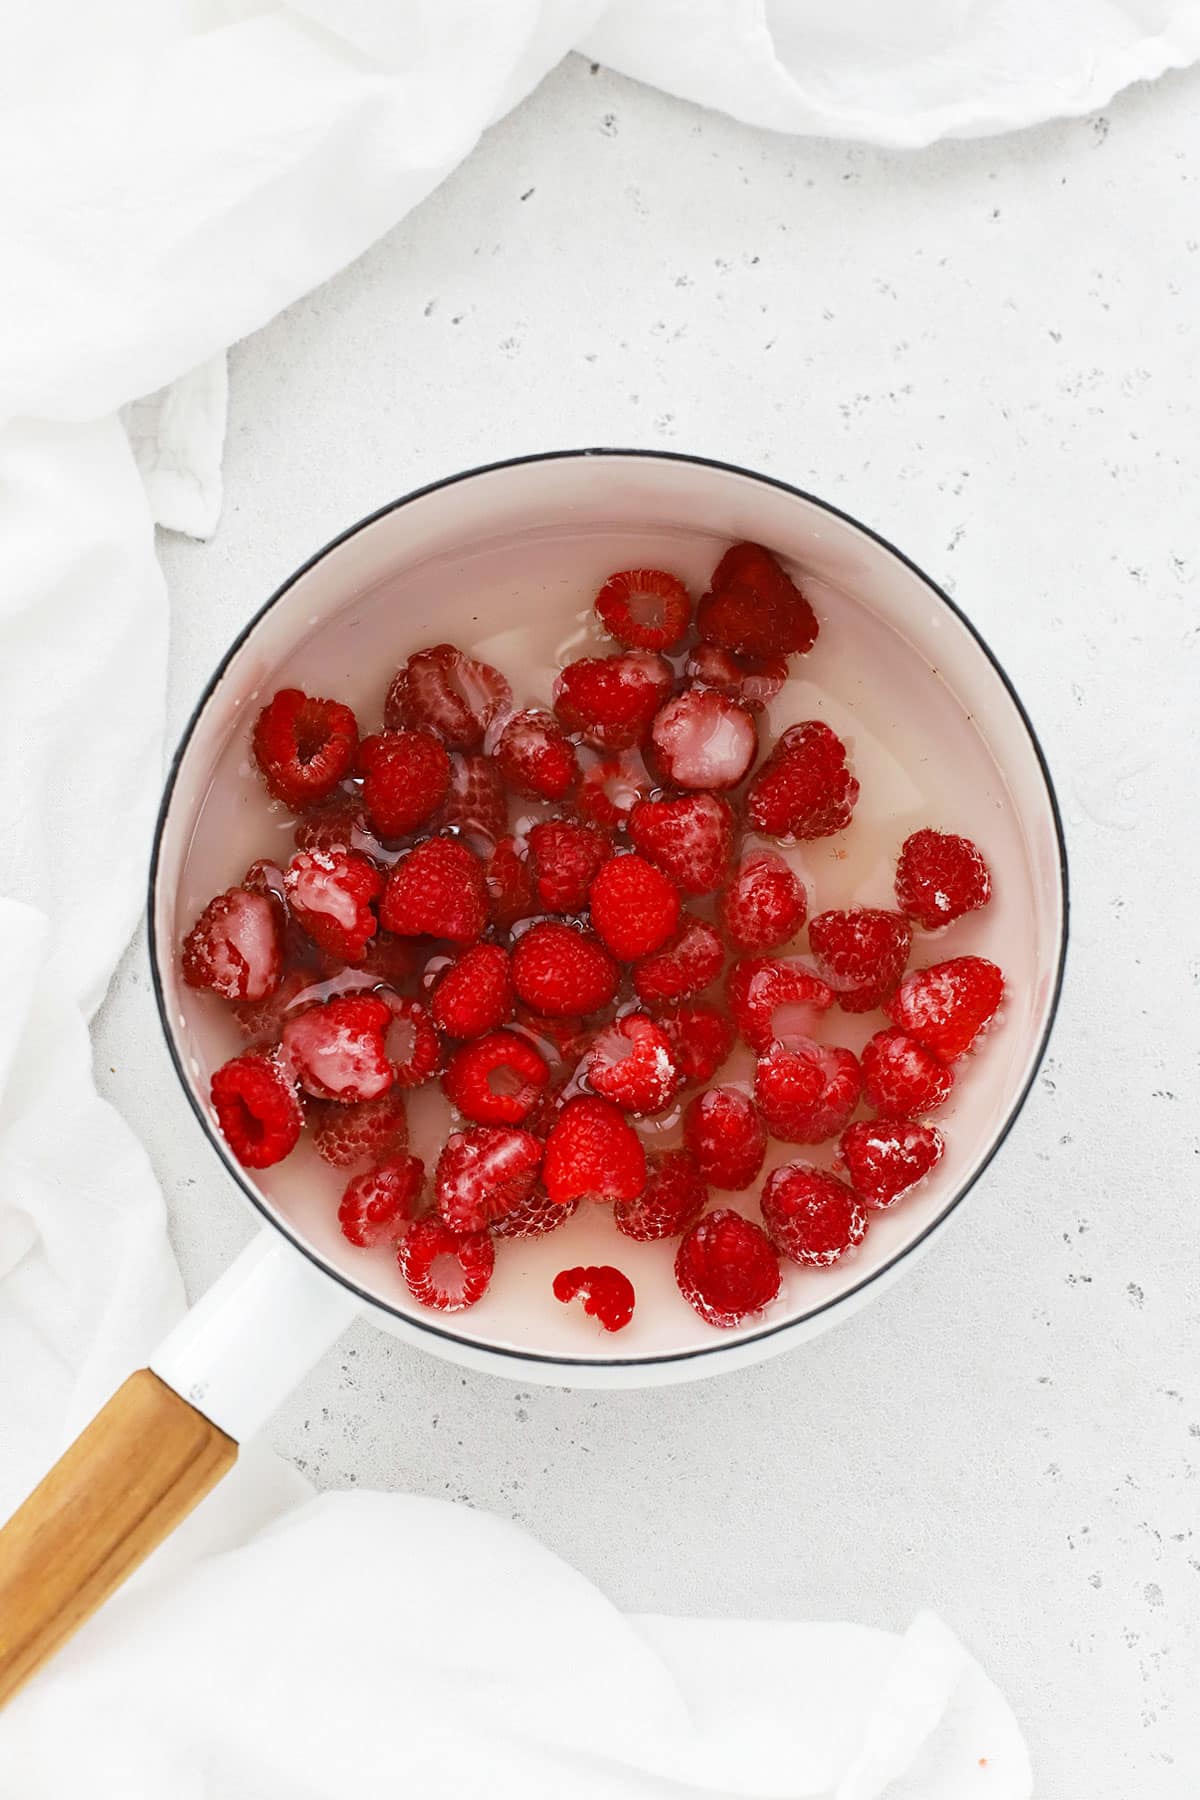 raspberries, sugar, and water in a white pan